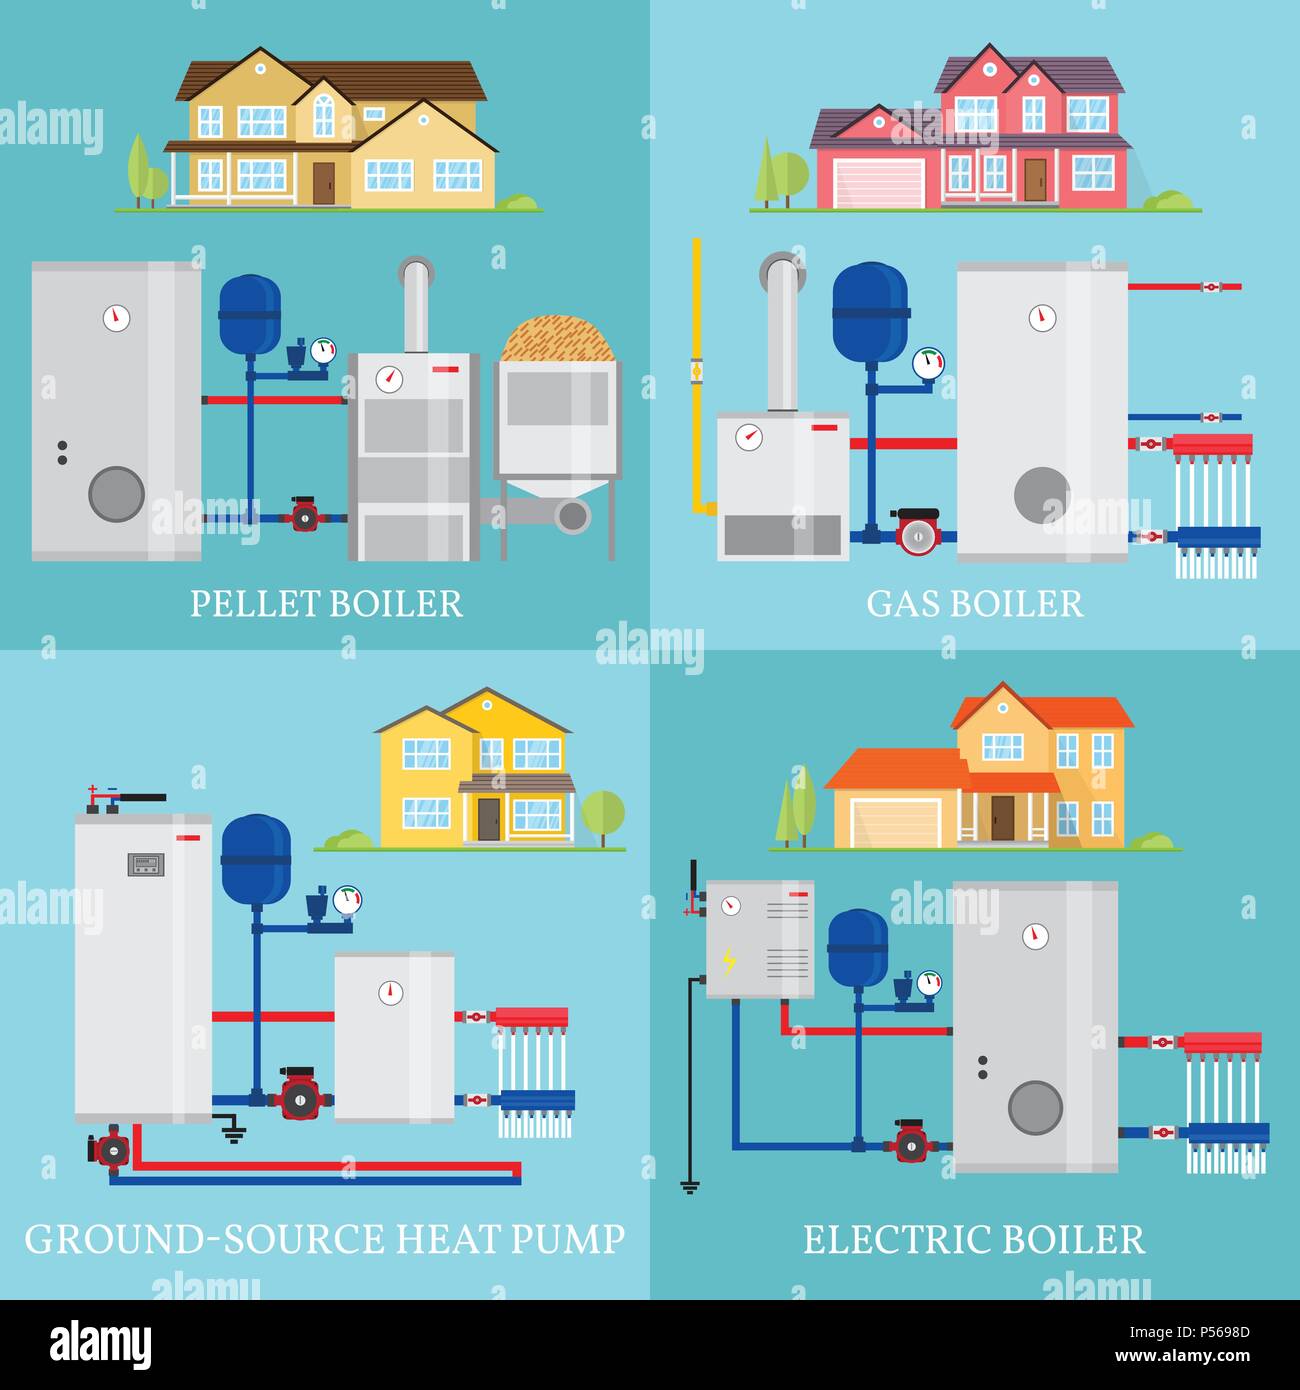 Types of heating systems. Set include gas, pellet, electric boilers and ground source heat pump in flat design. Vector illustrations. Stock Vector